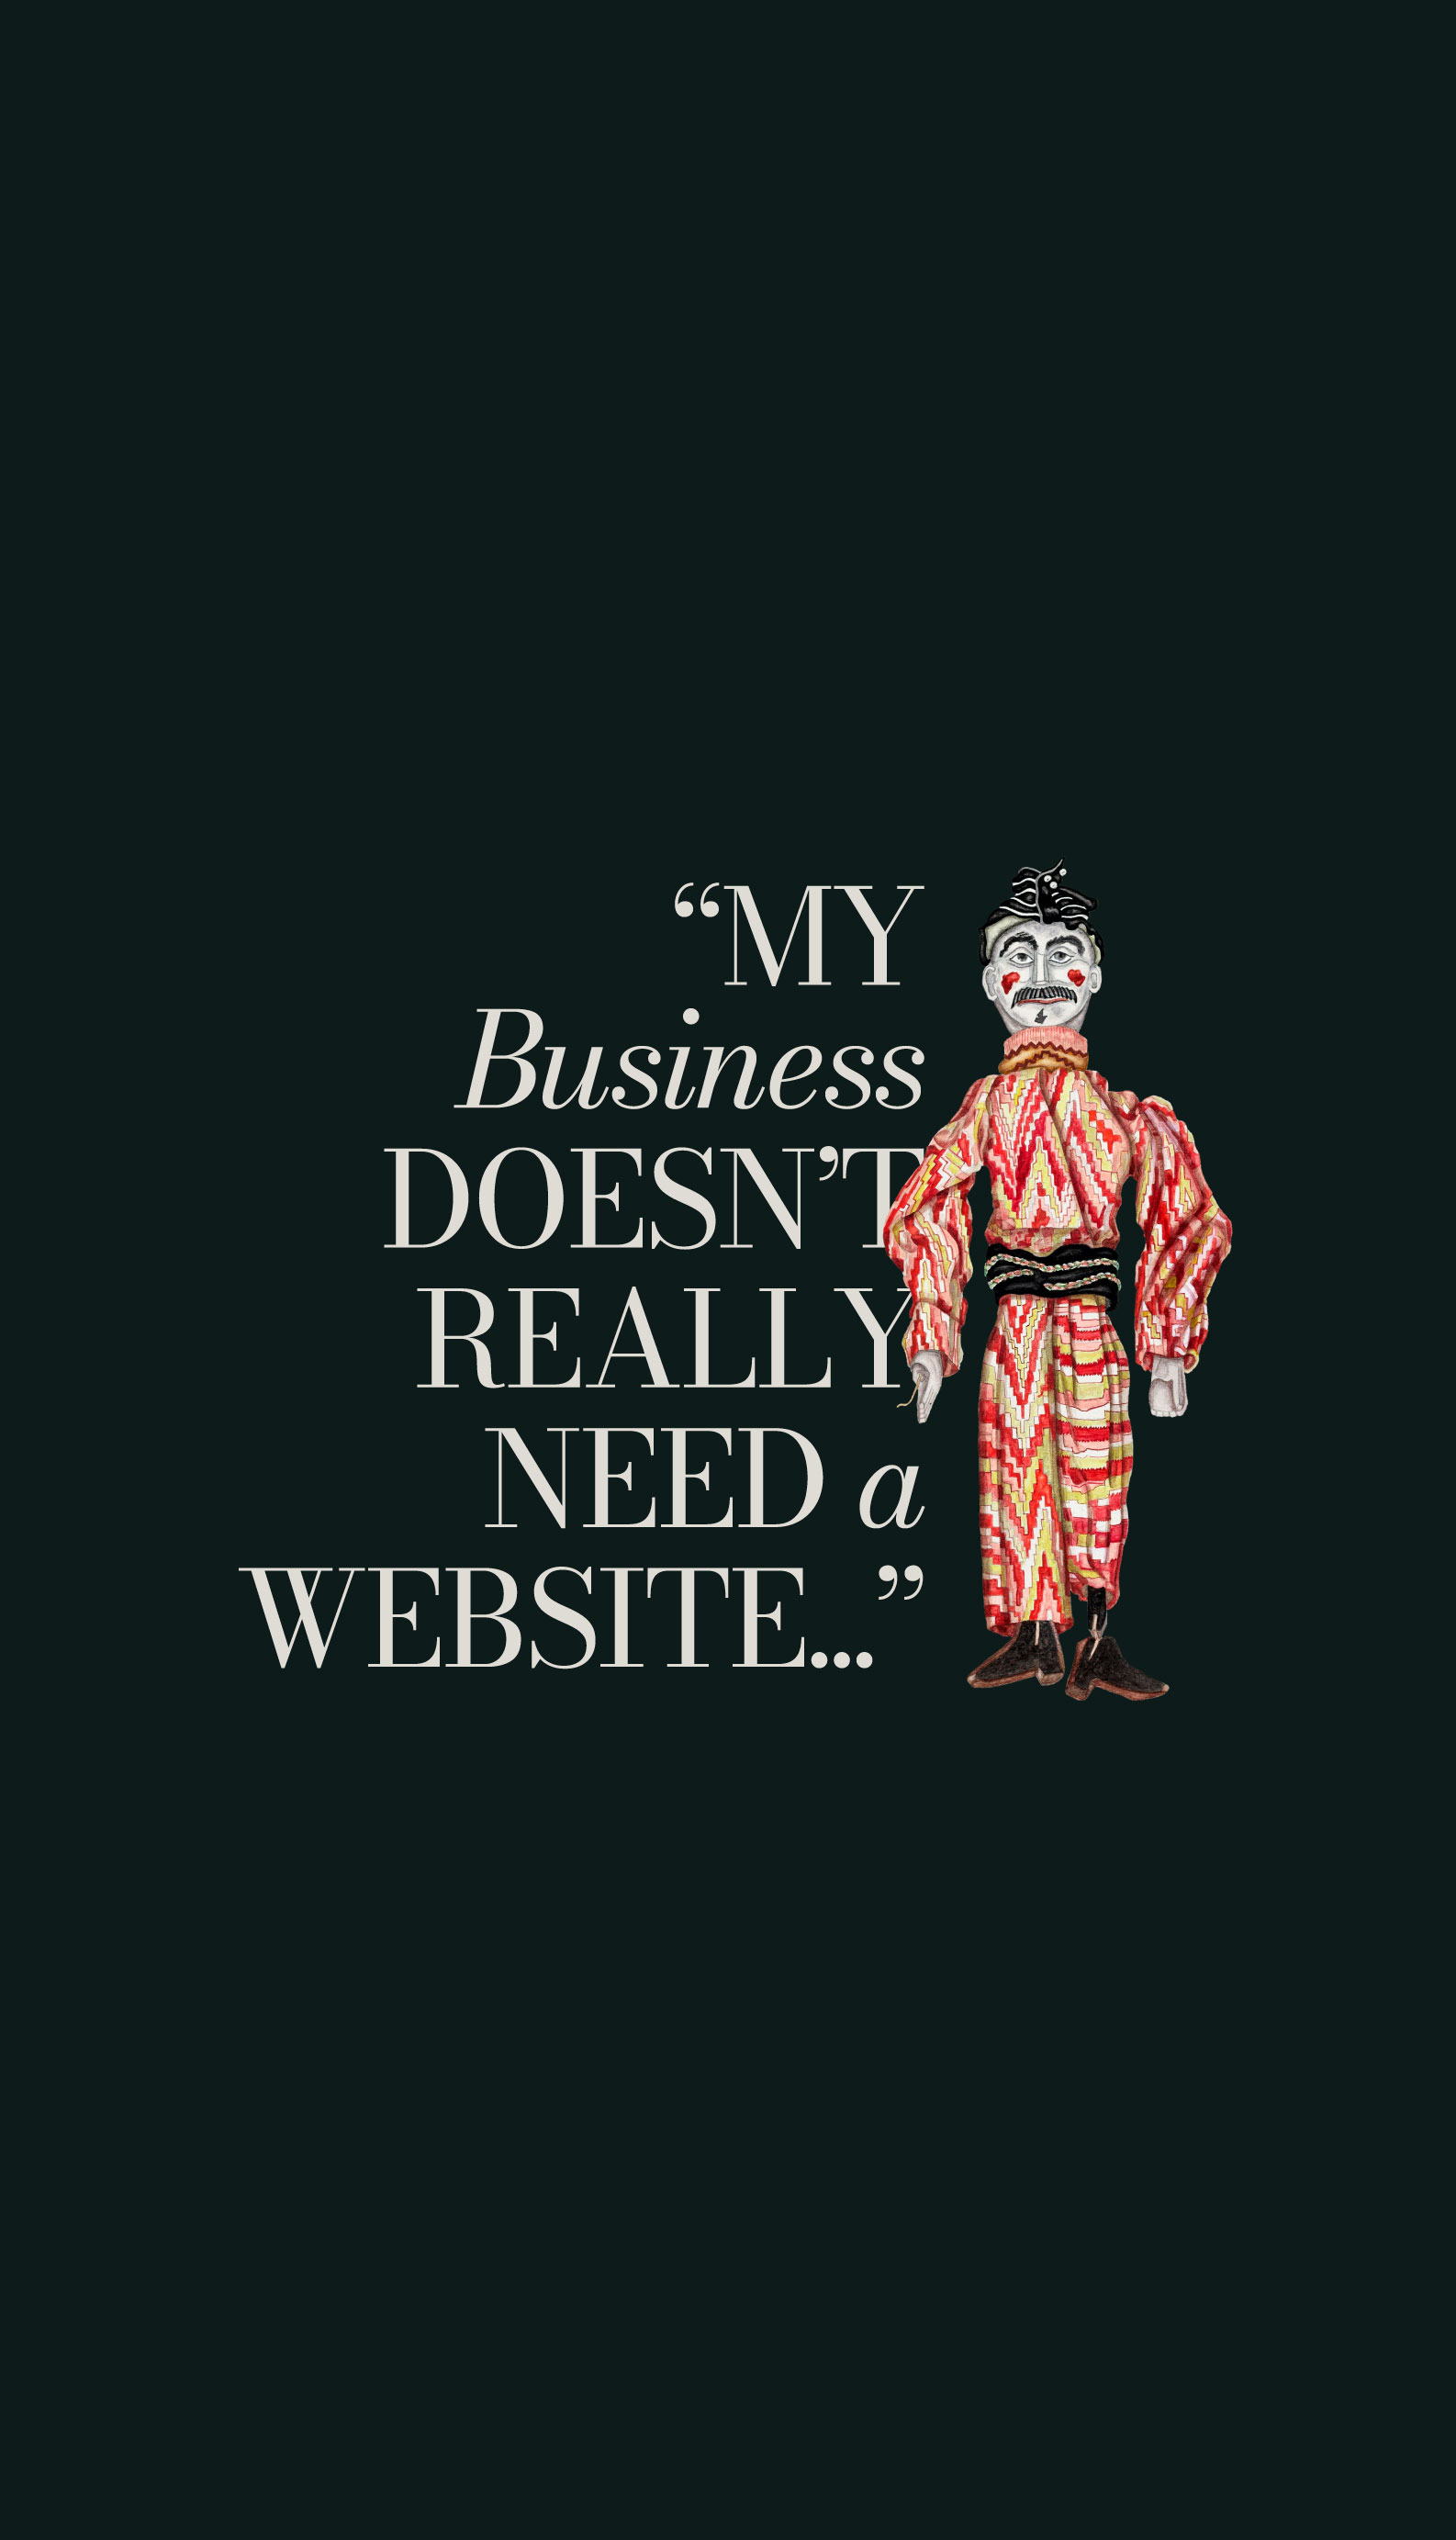 "My Business Doesn't Really Need a Website..."